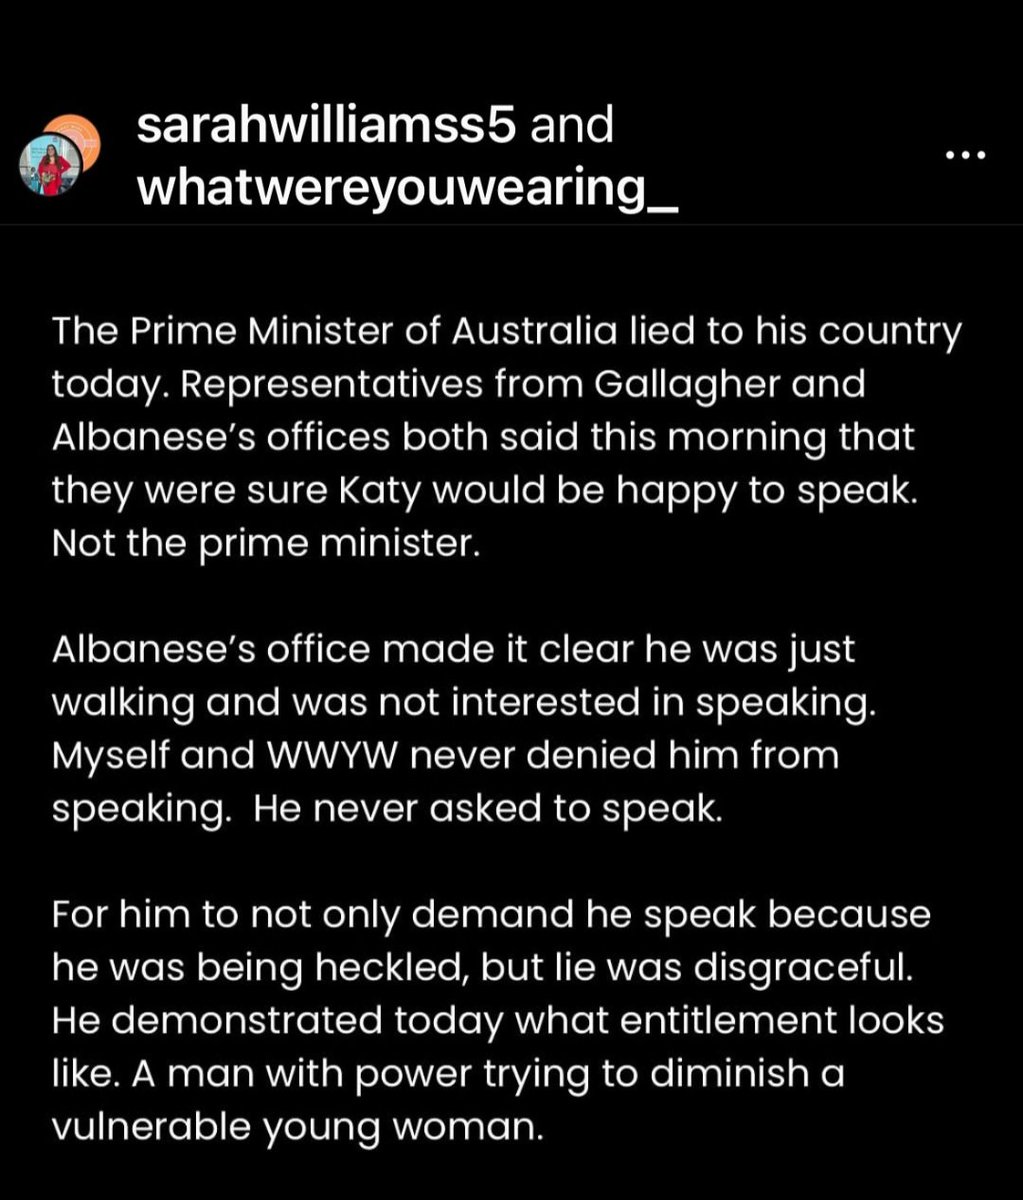 Albo. @AlboMP you've done it again.
You have no feeling for the people.
It's all about polls and ratings.
Shame on you.
#NotMyPM 
#auspol